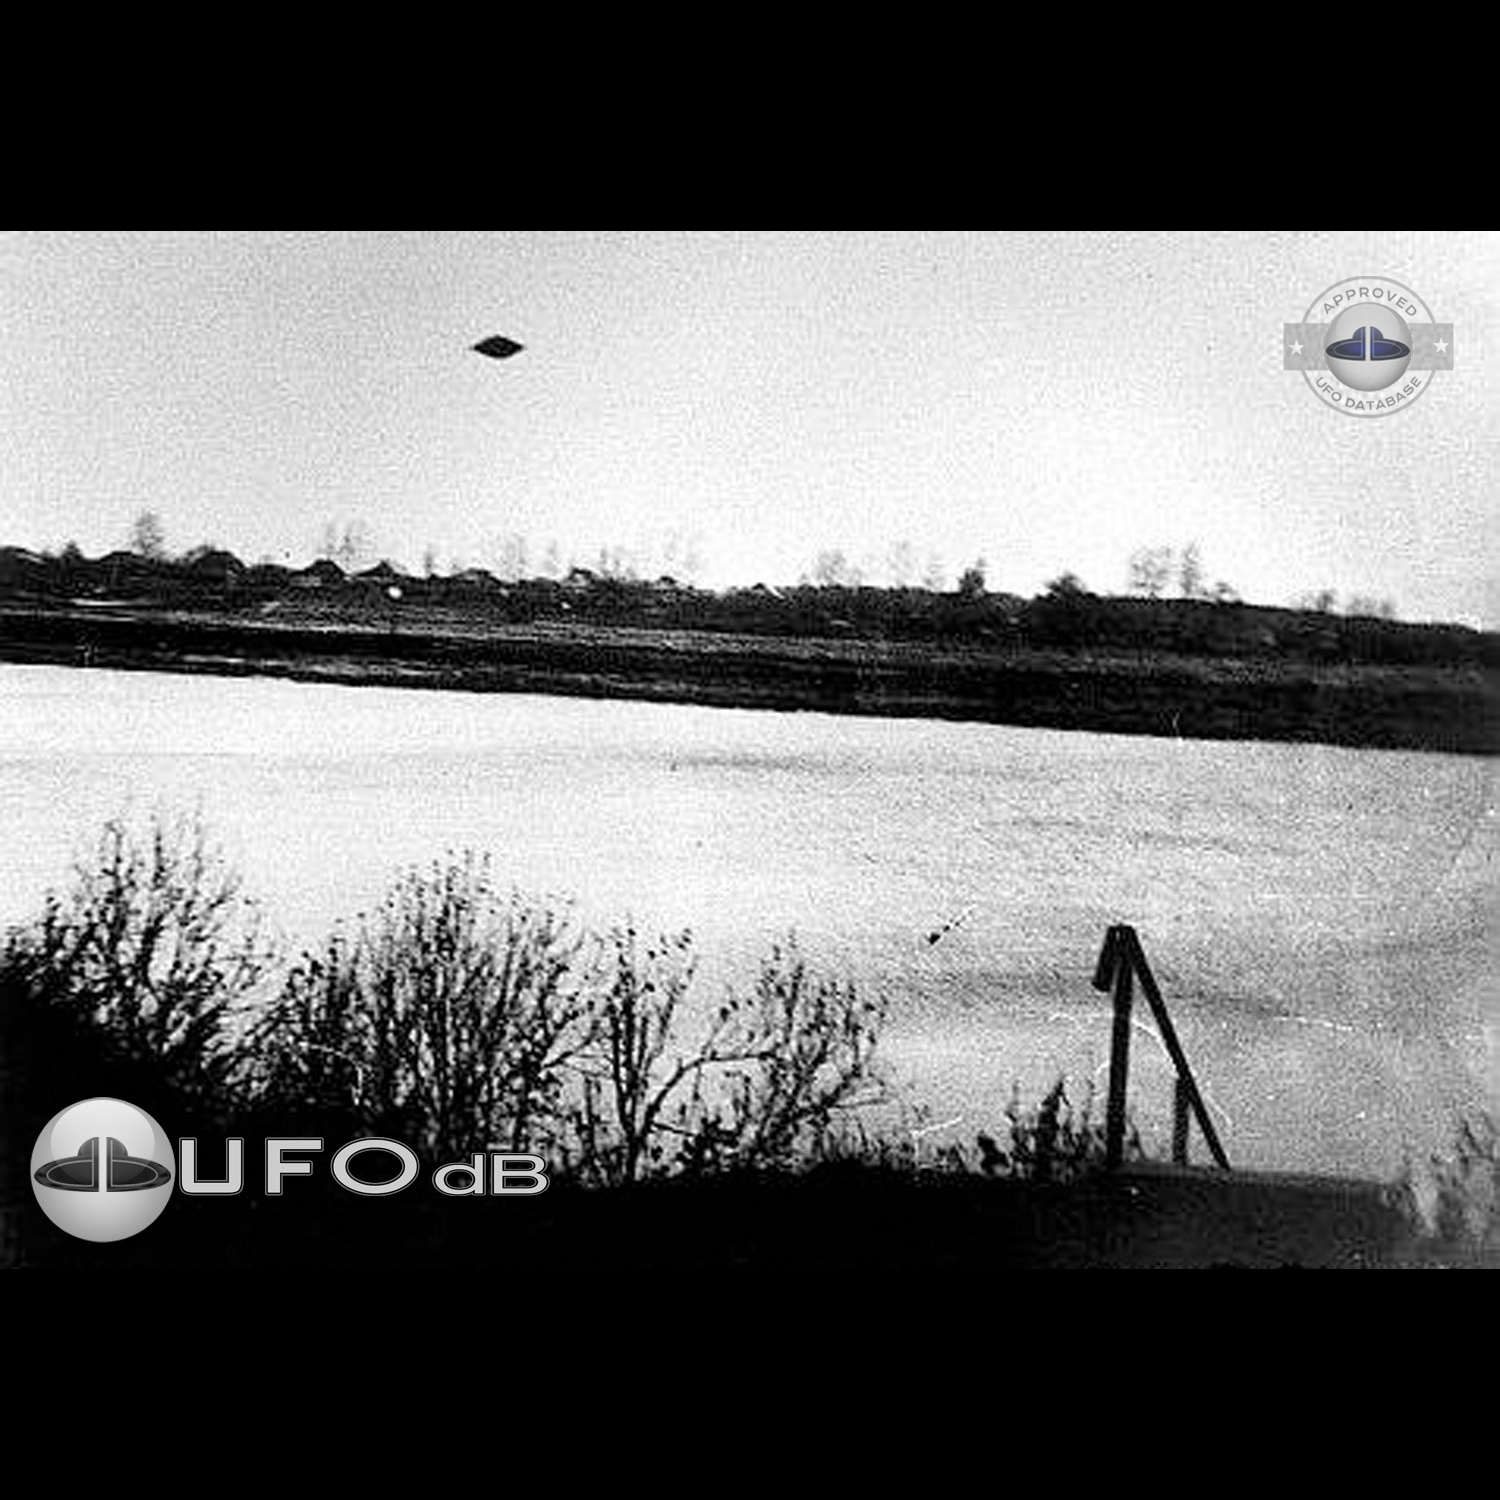 Sighting of UFO by two teenagers in Russia - Volga river Tver | 1991 UFO Picture #215-1